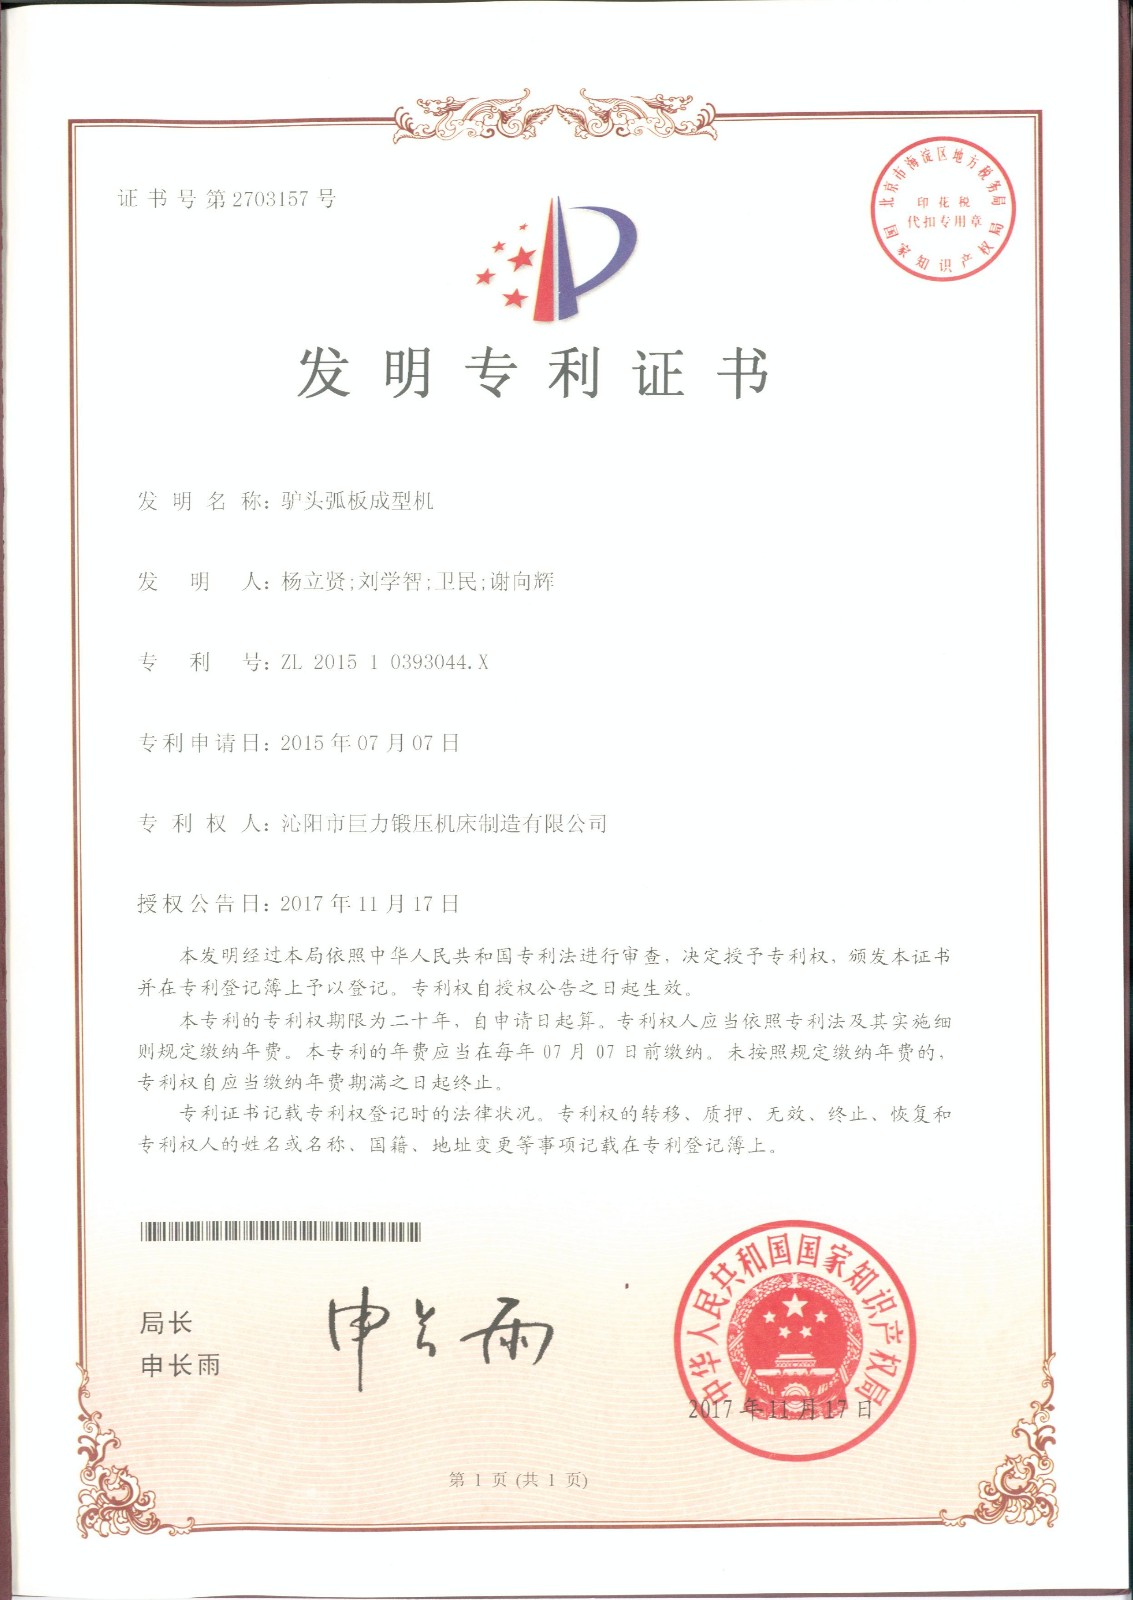 Shantou arc plate forming machine invention patent certificate